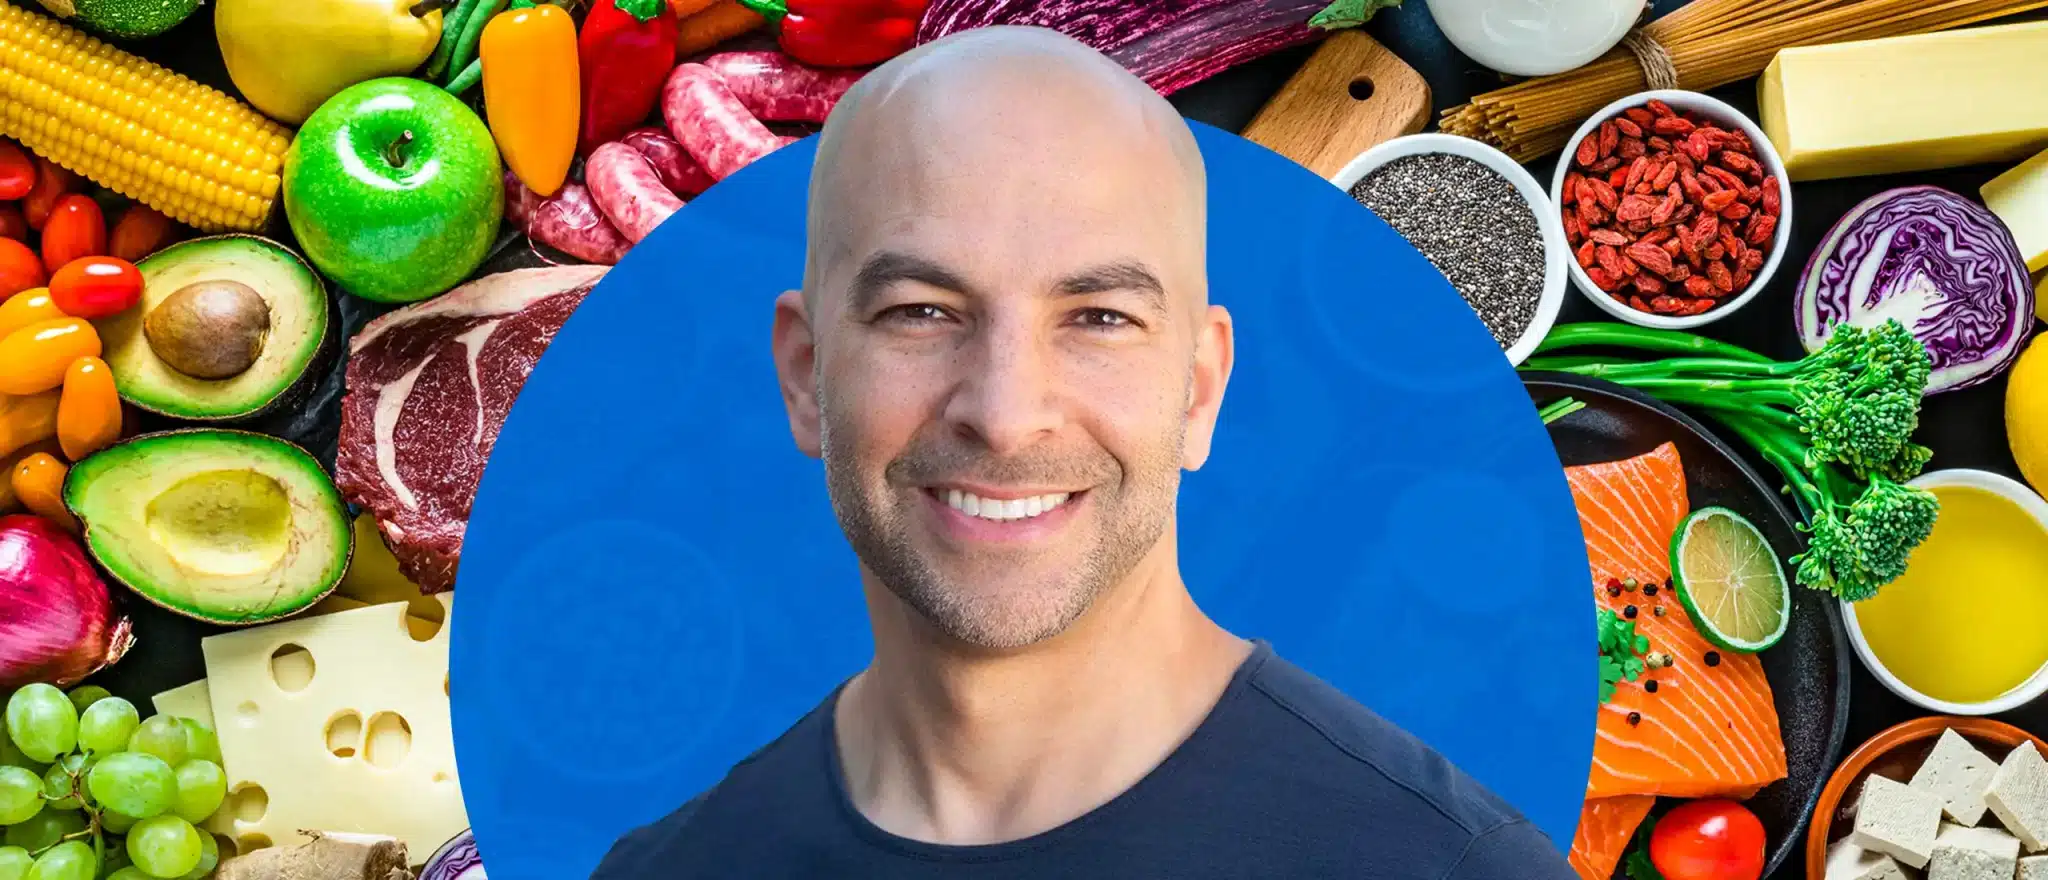 Peter Attia’s 5 Best Tips for Eating Your Way to a Longer Life